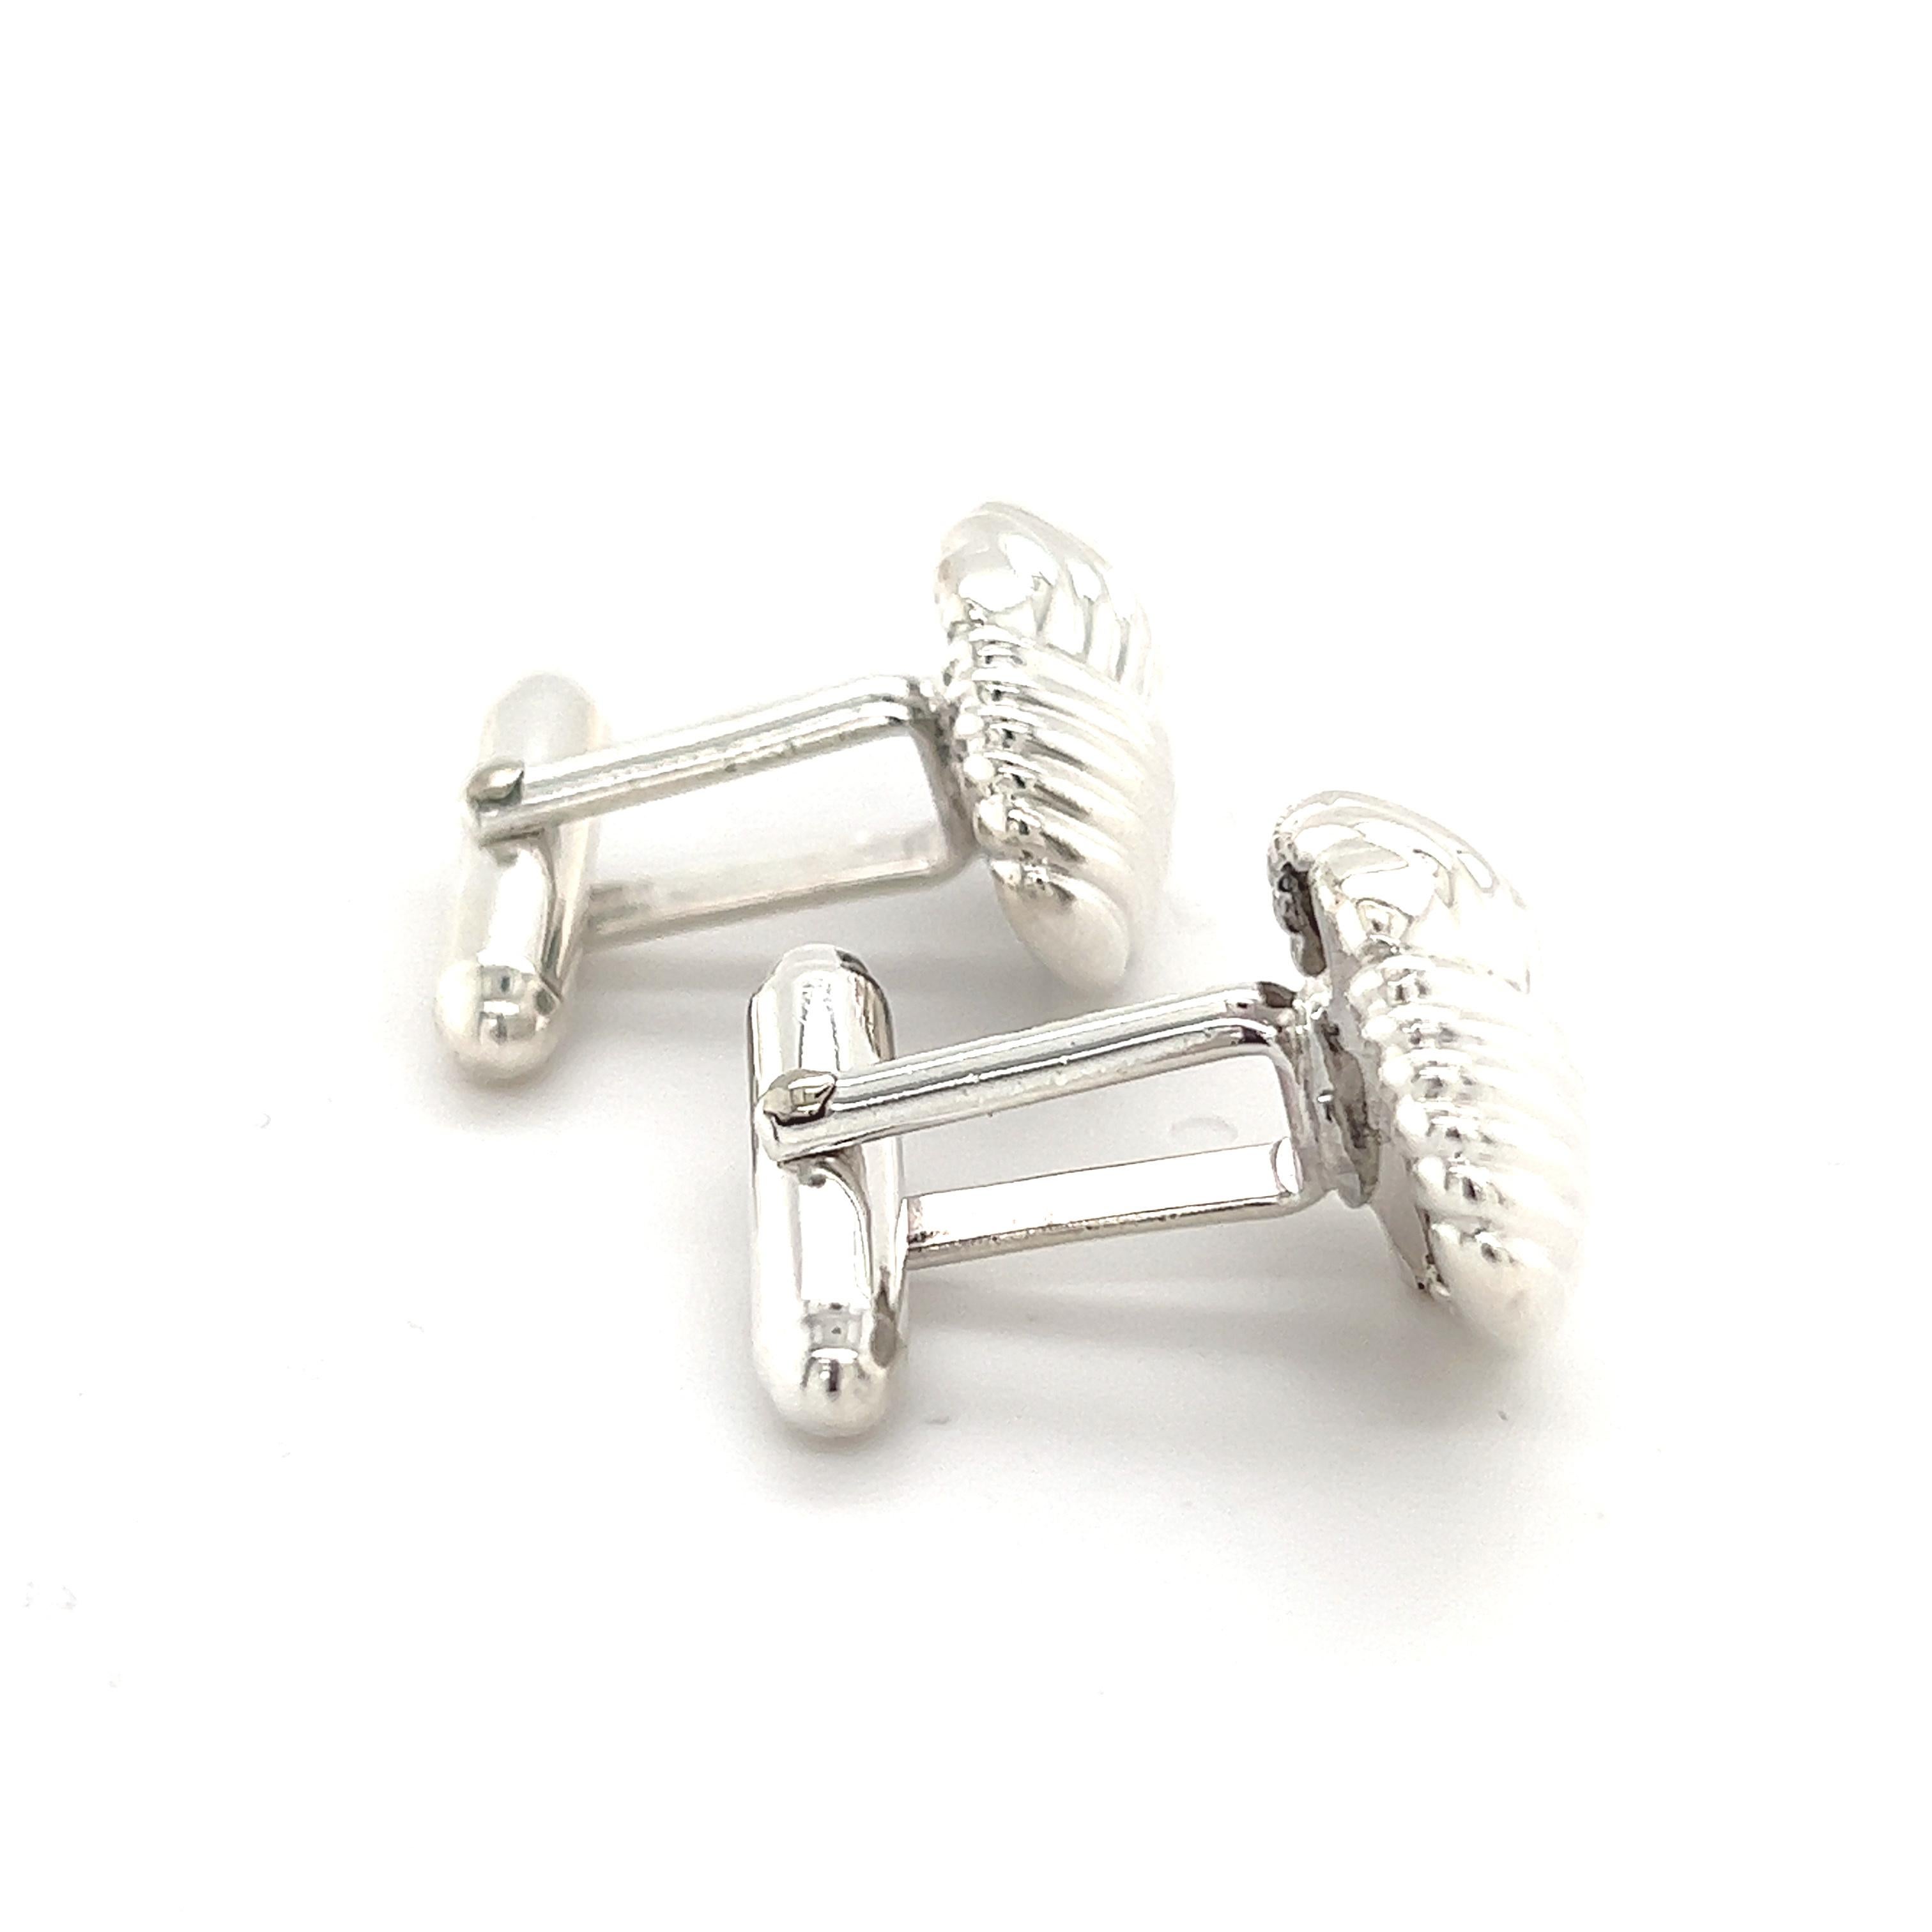 Tiffany & Co Estate Mens Designed Cufflinks Sterling Silver 9.9 Grams TIF240

TRUSTED SELLER SINCE 2002

PLEASE SEE OUR HUNDREDS OF POSITIVE FEEDBACKS FROM OUR CLIENTS!!

FREE SHIPPING

DETAILS
Metal: Sterling Silver 
Weight: 9.9 Grams

These